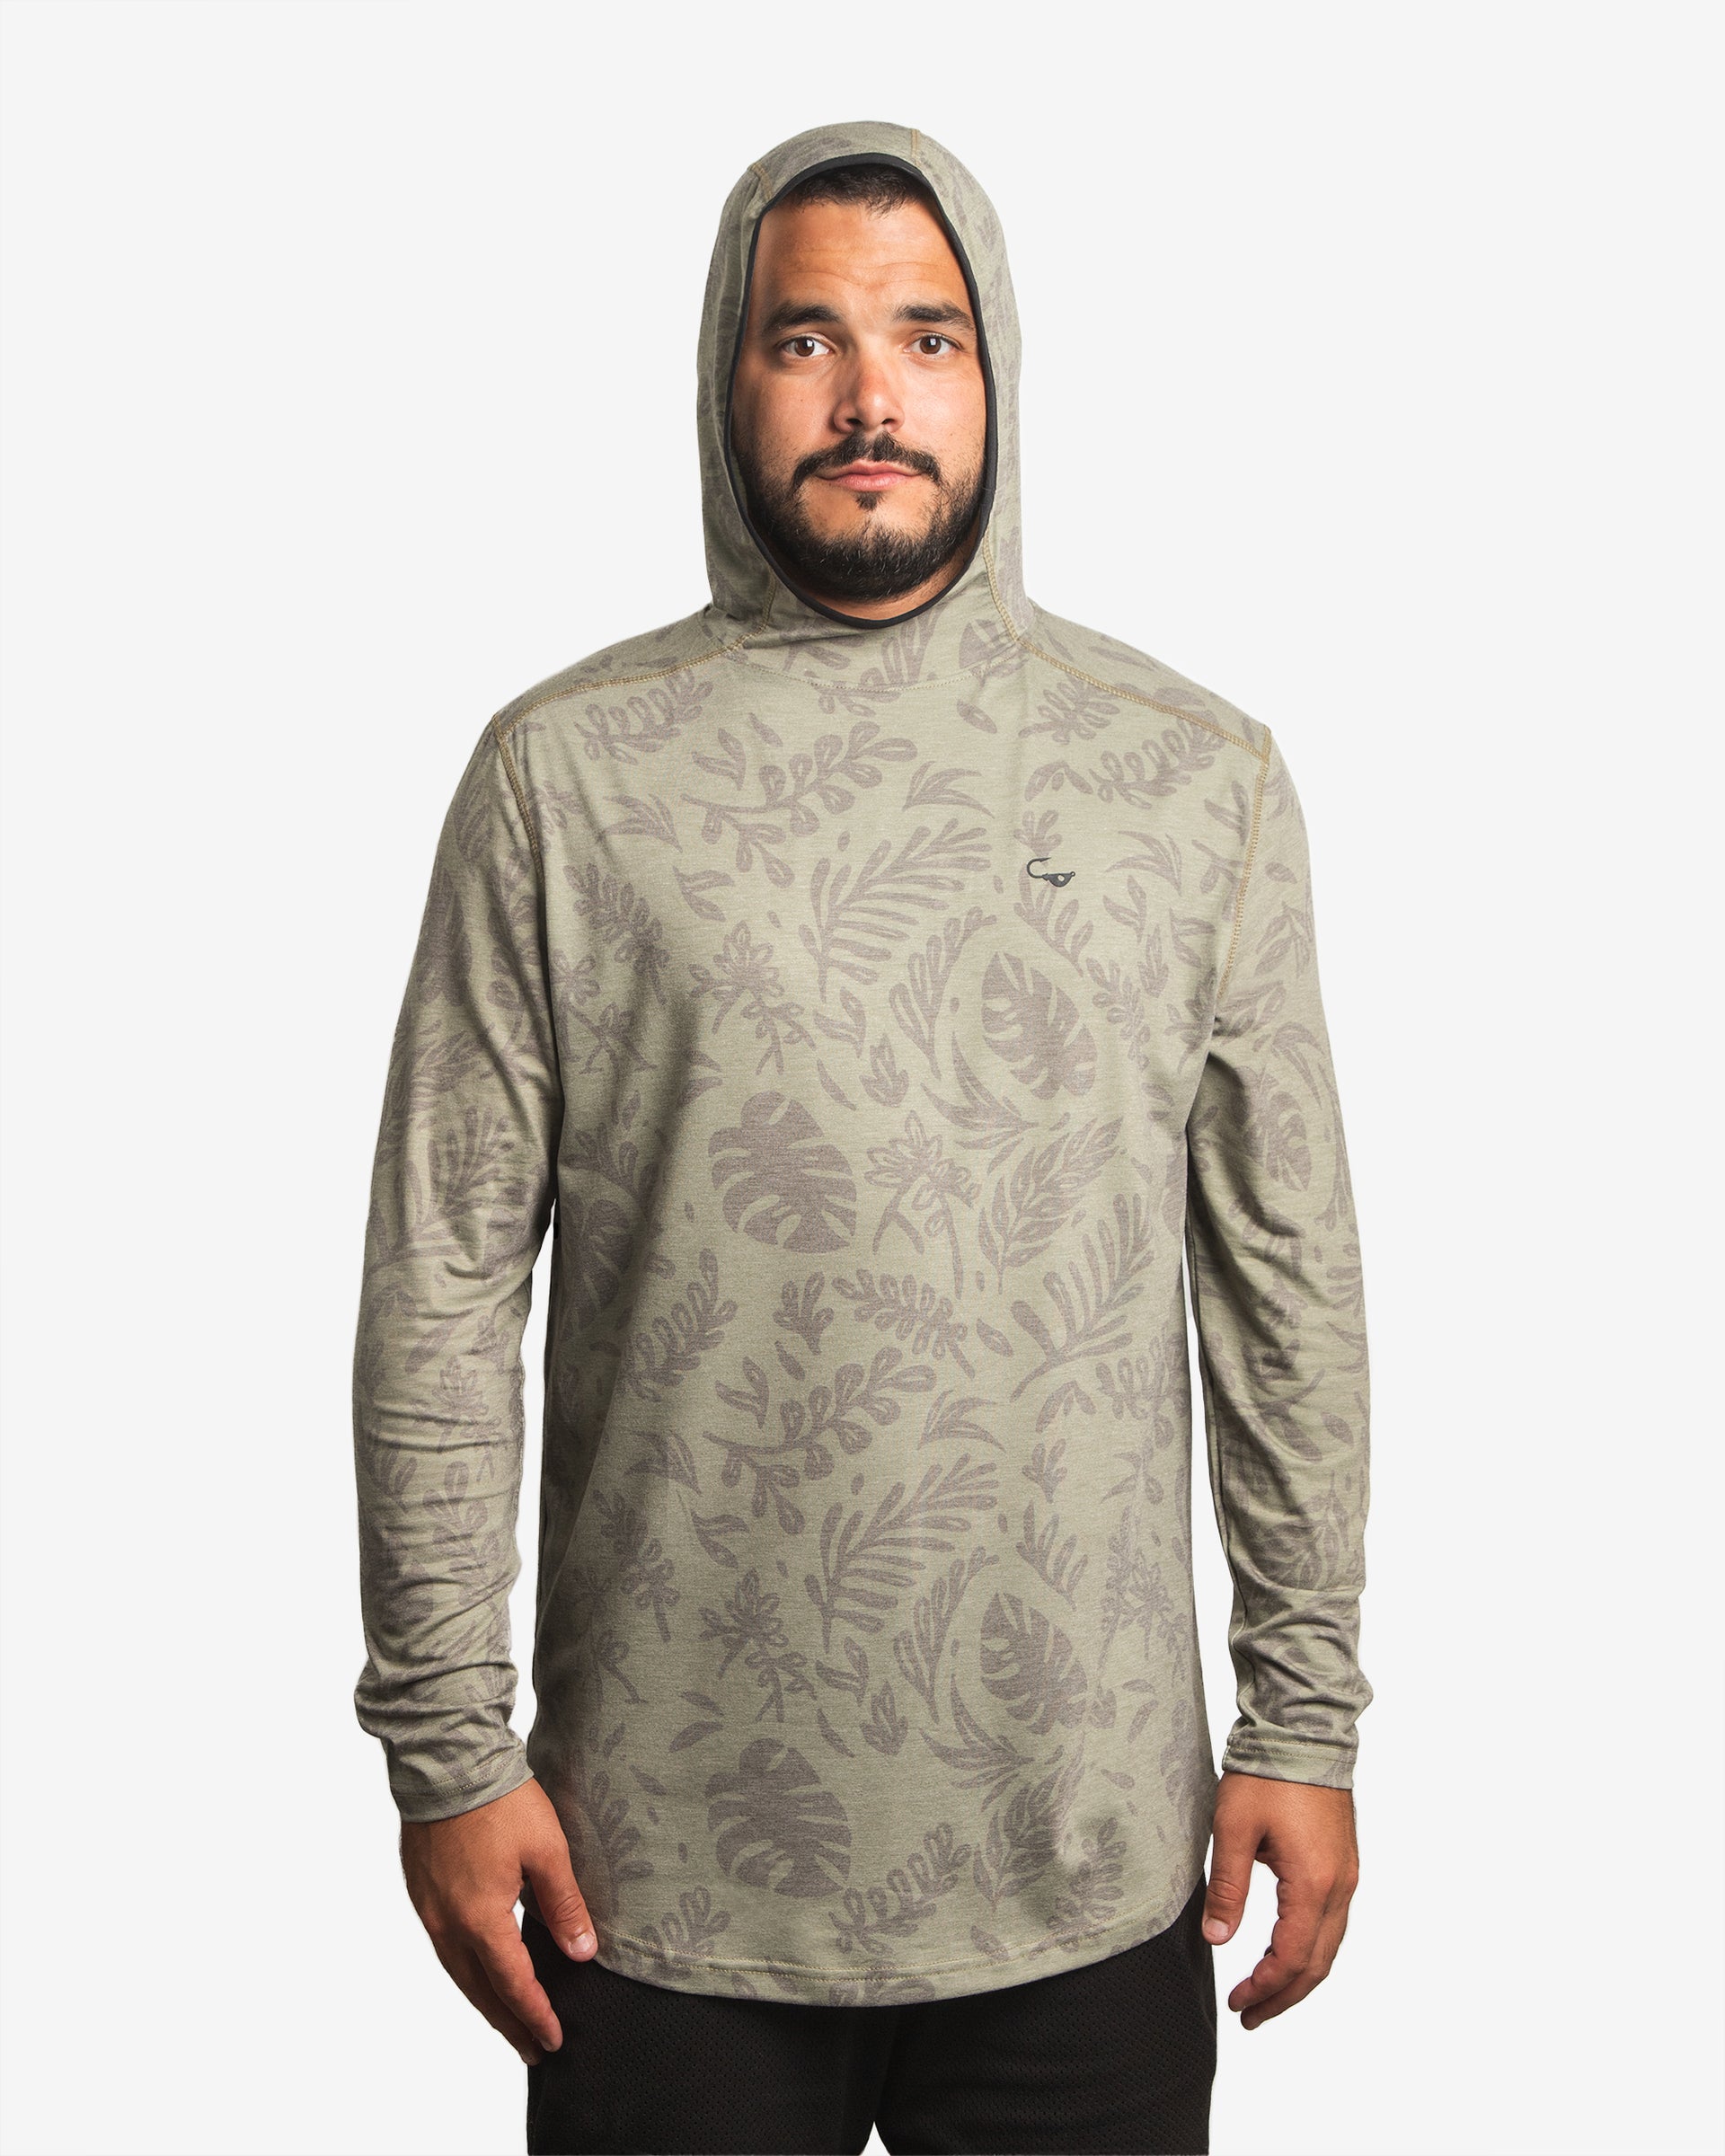 Front view of male model wearing the Jigalode Mighty Jig Performance Fishing Hoodie in moss green with an all-over tropical plant pattern. The hoodie, with the hood on, offers UPF 30 sun protection and features moisture-wicking properties. The model displays the hoodie's functionality and fashionable appeal.